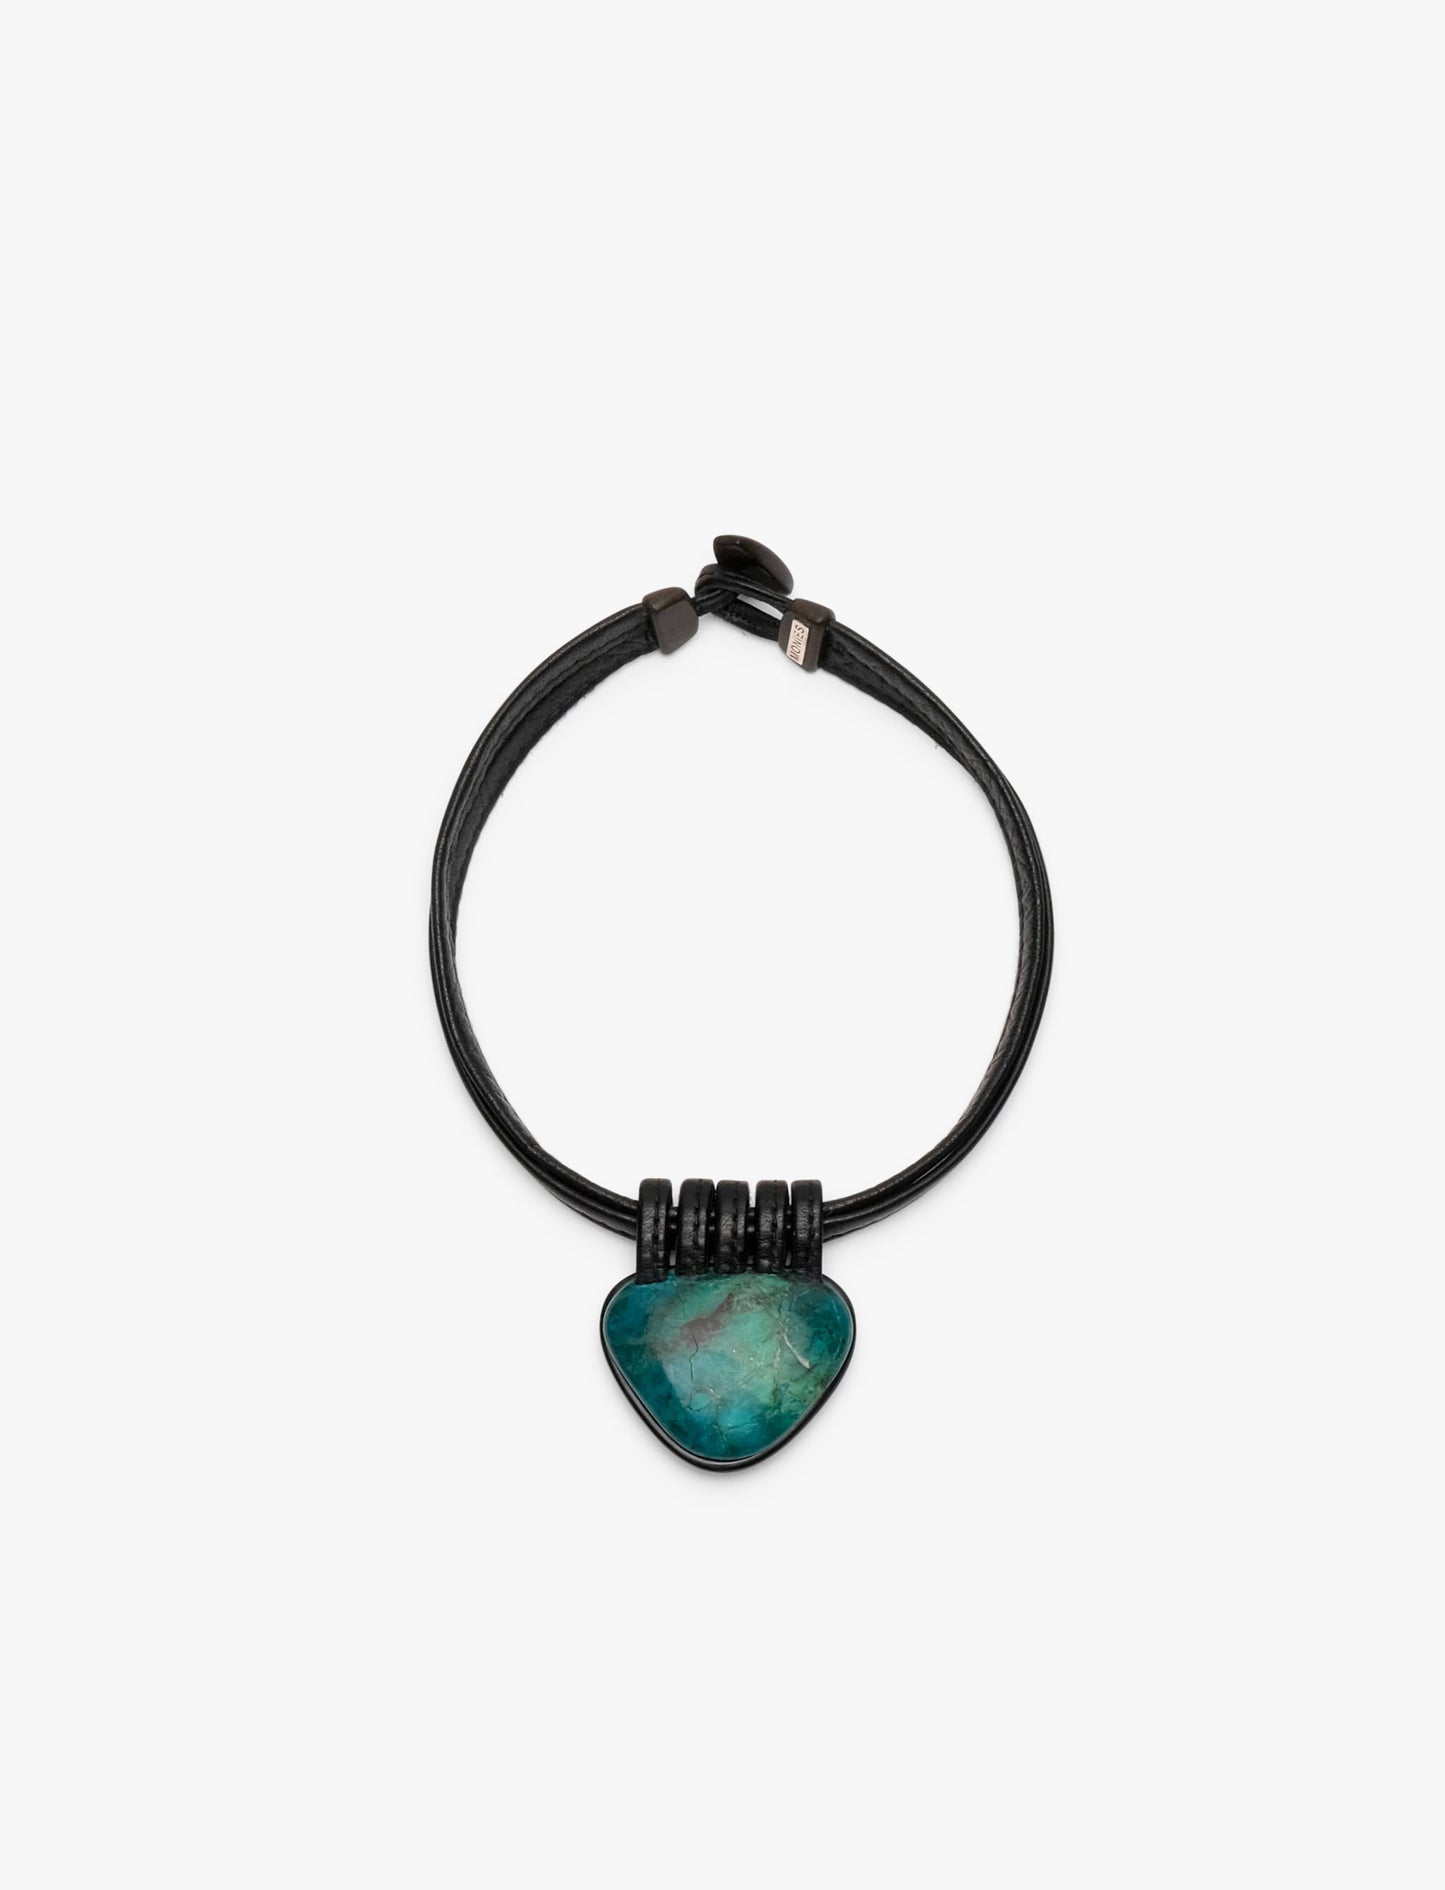 Necklace: chrysocolla and leather